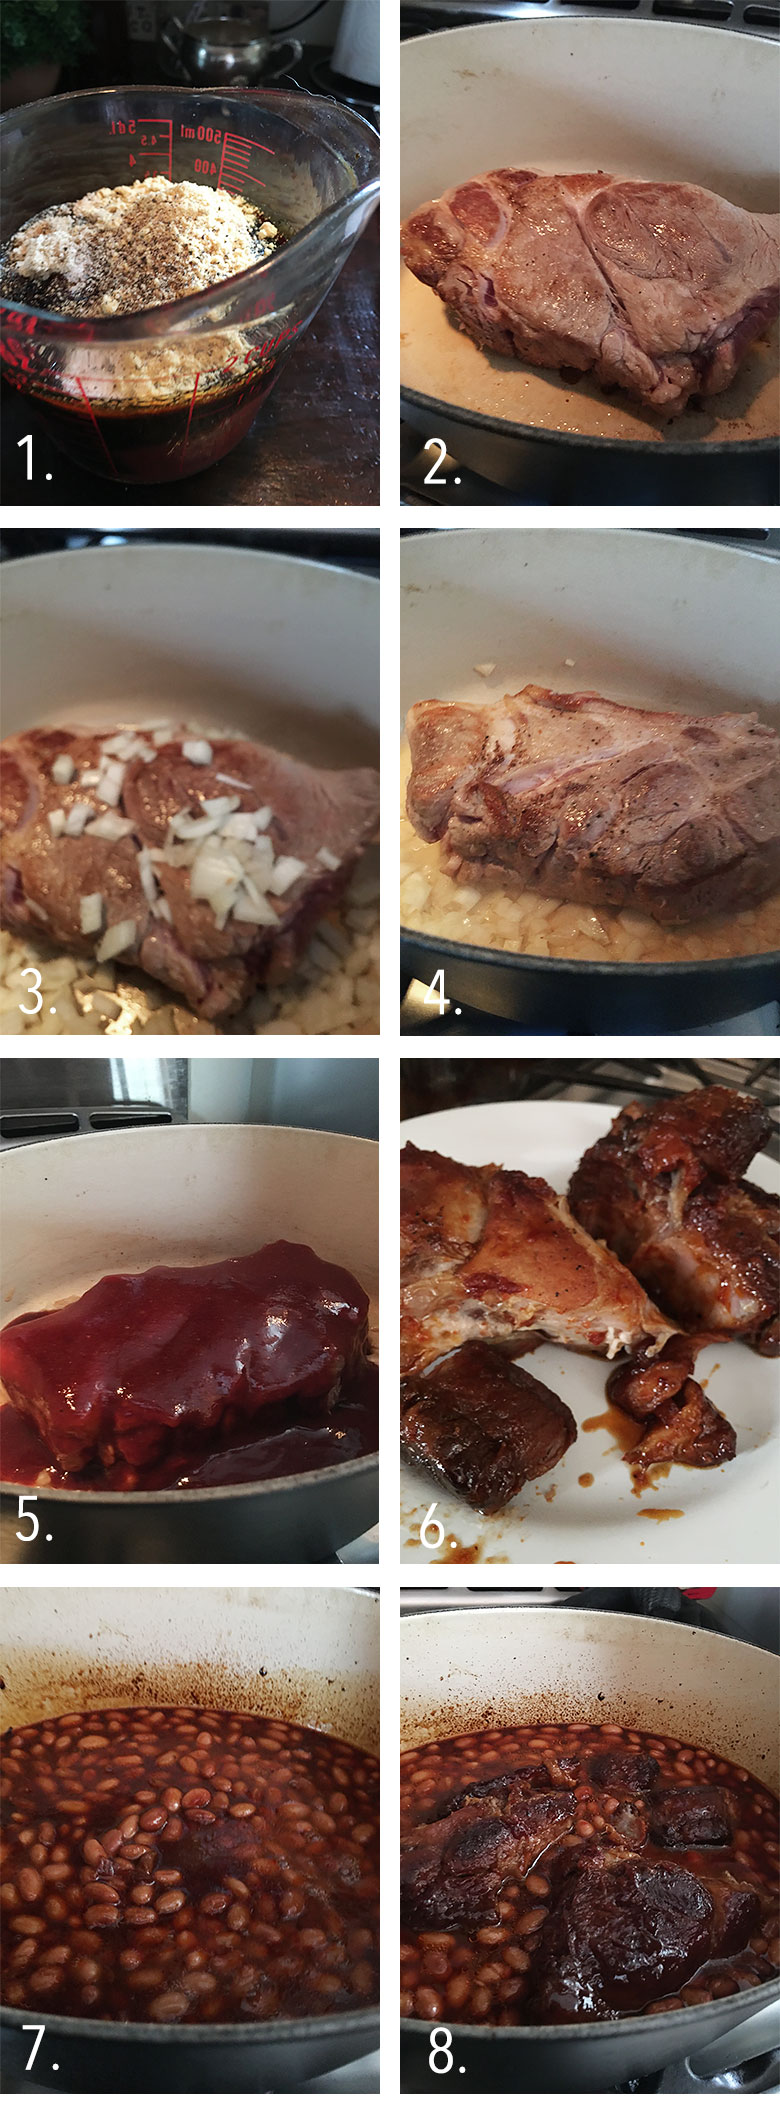 How to make Pork and Beans Step by Step photos